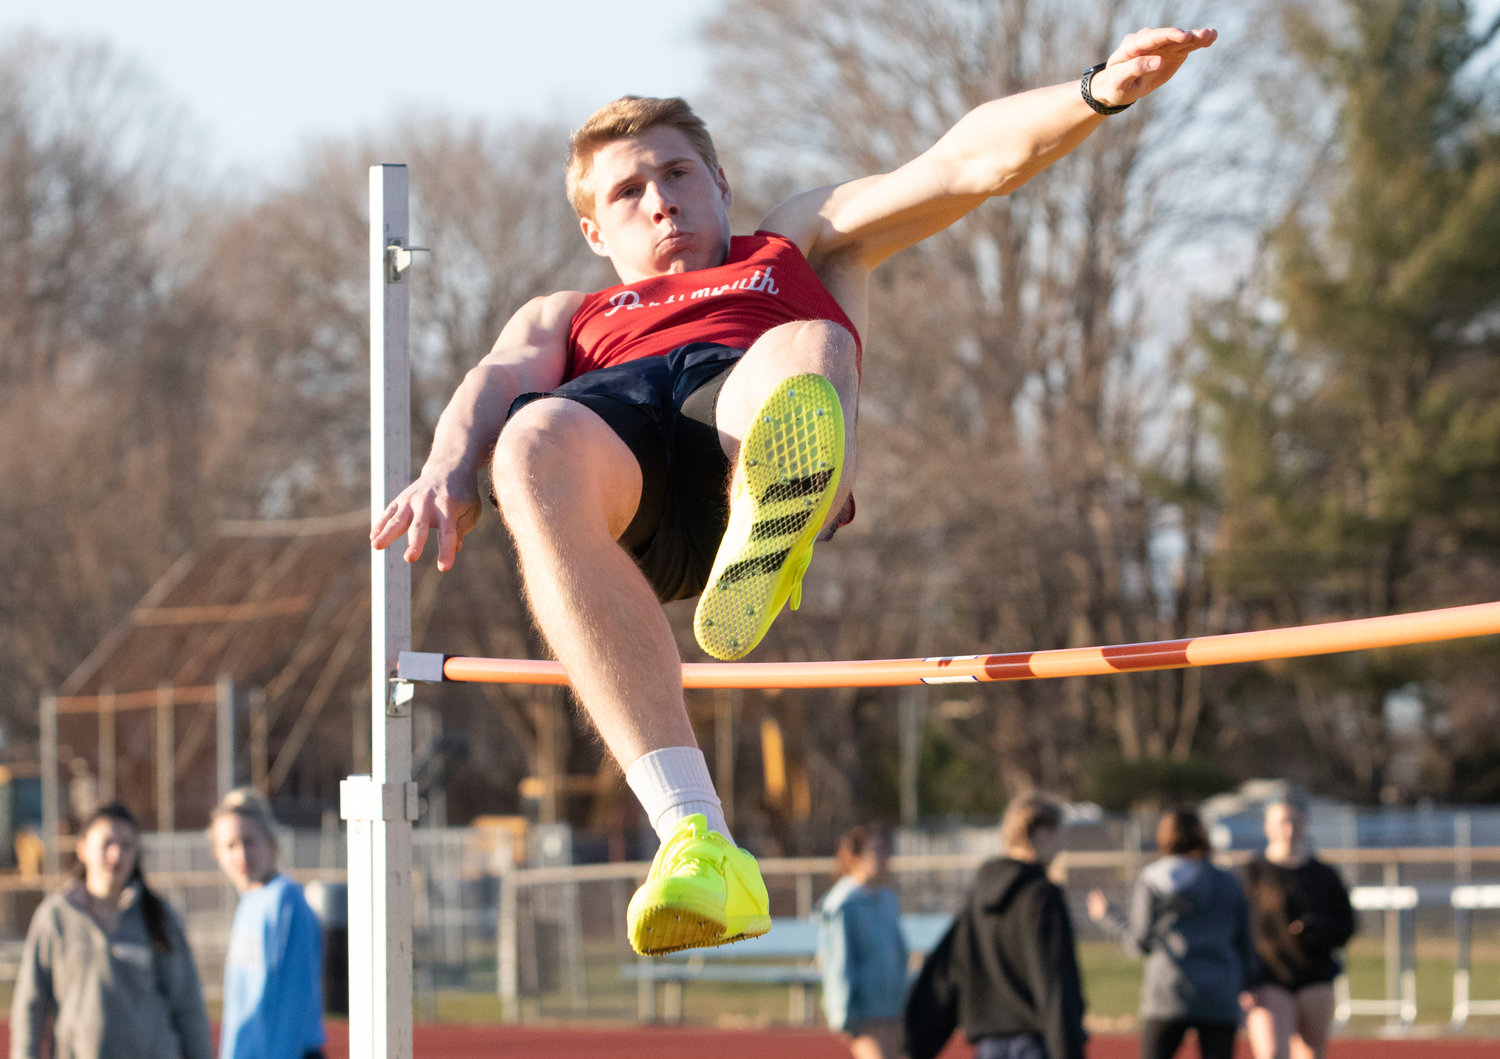 The Patriots’ Jeff Brady competes in the high jump.